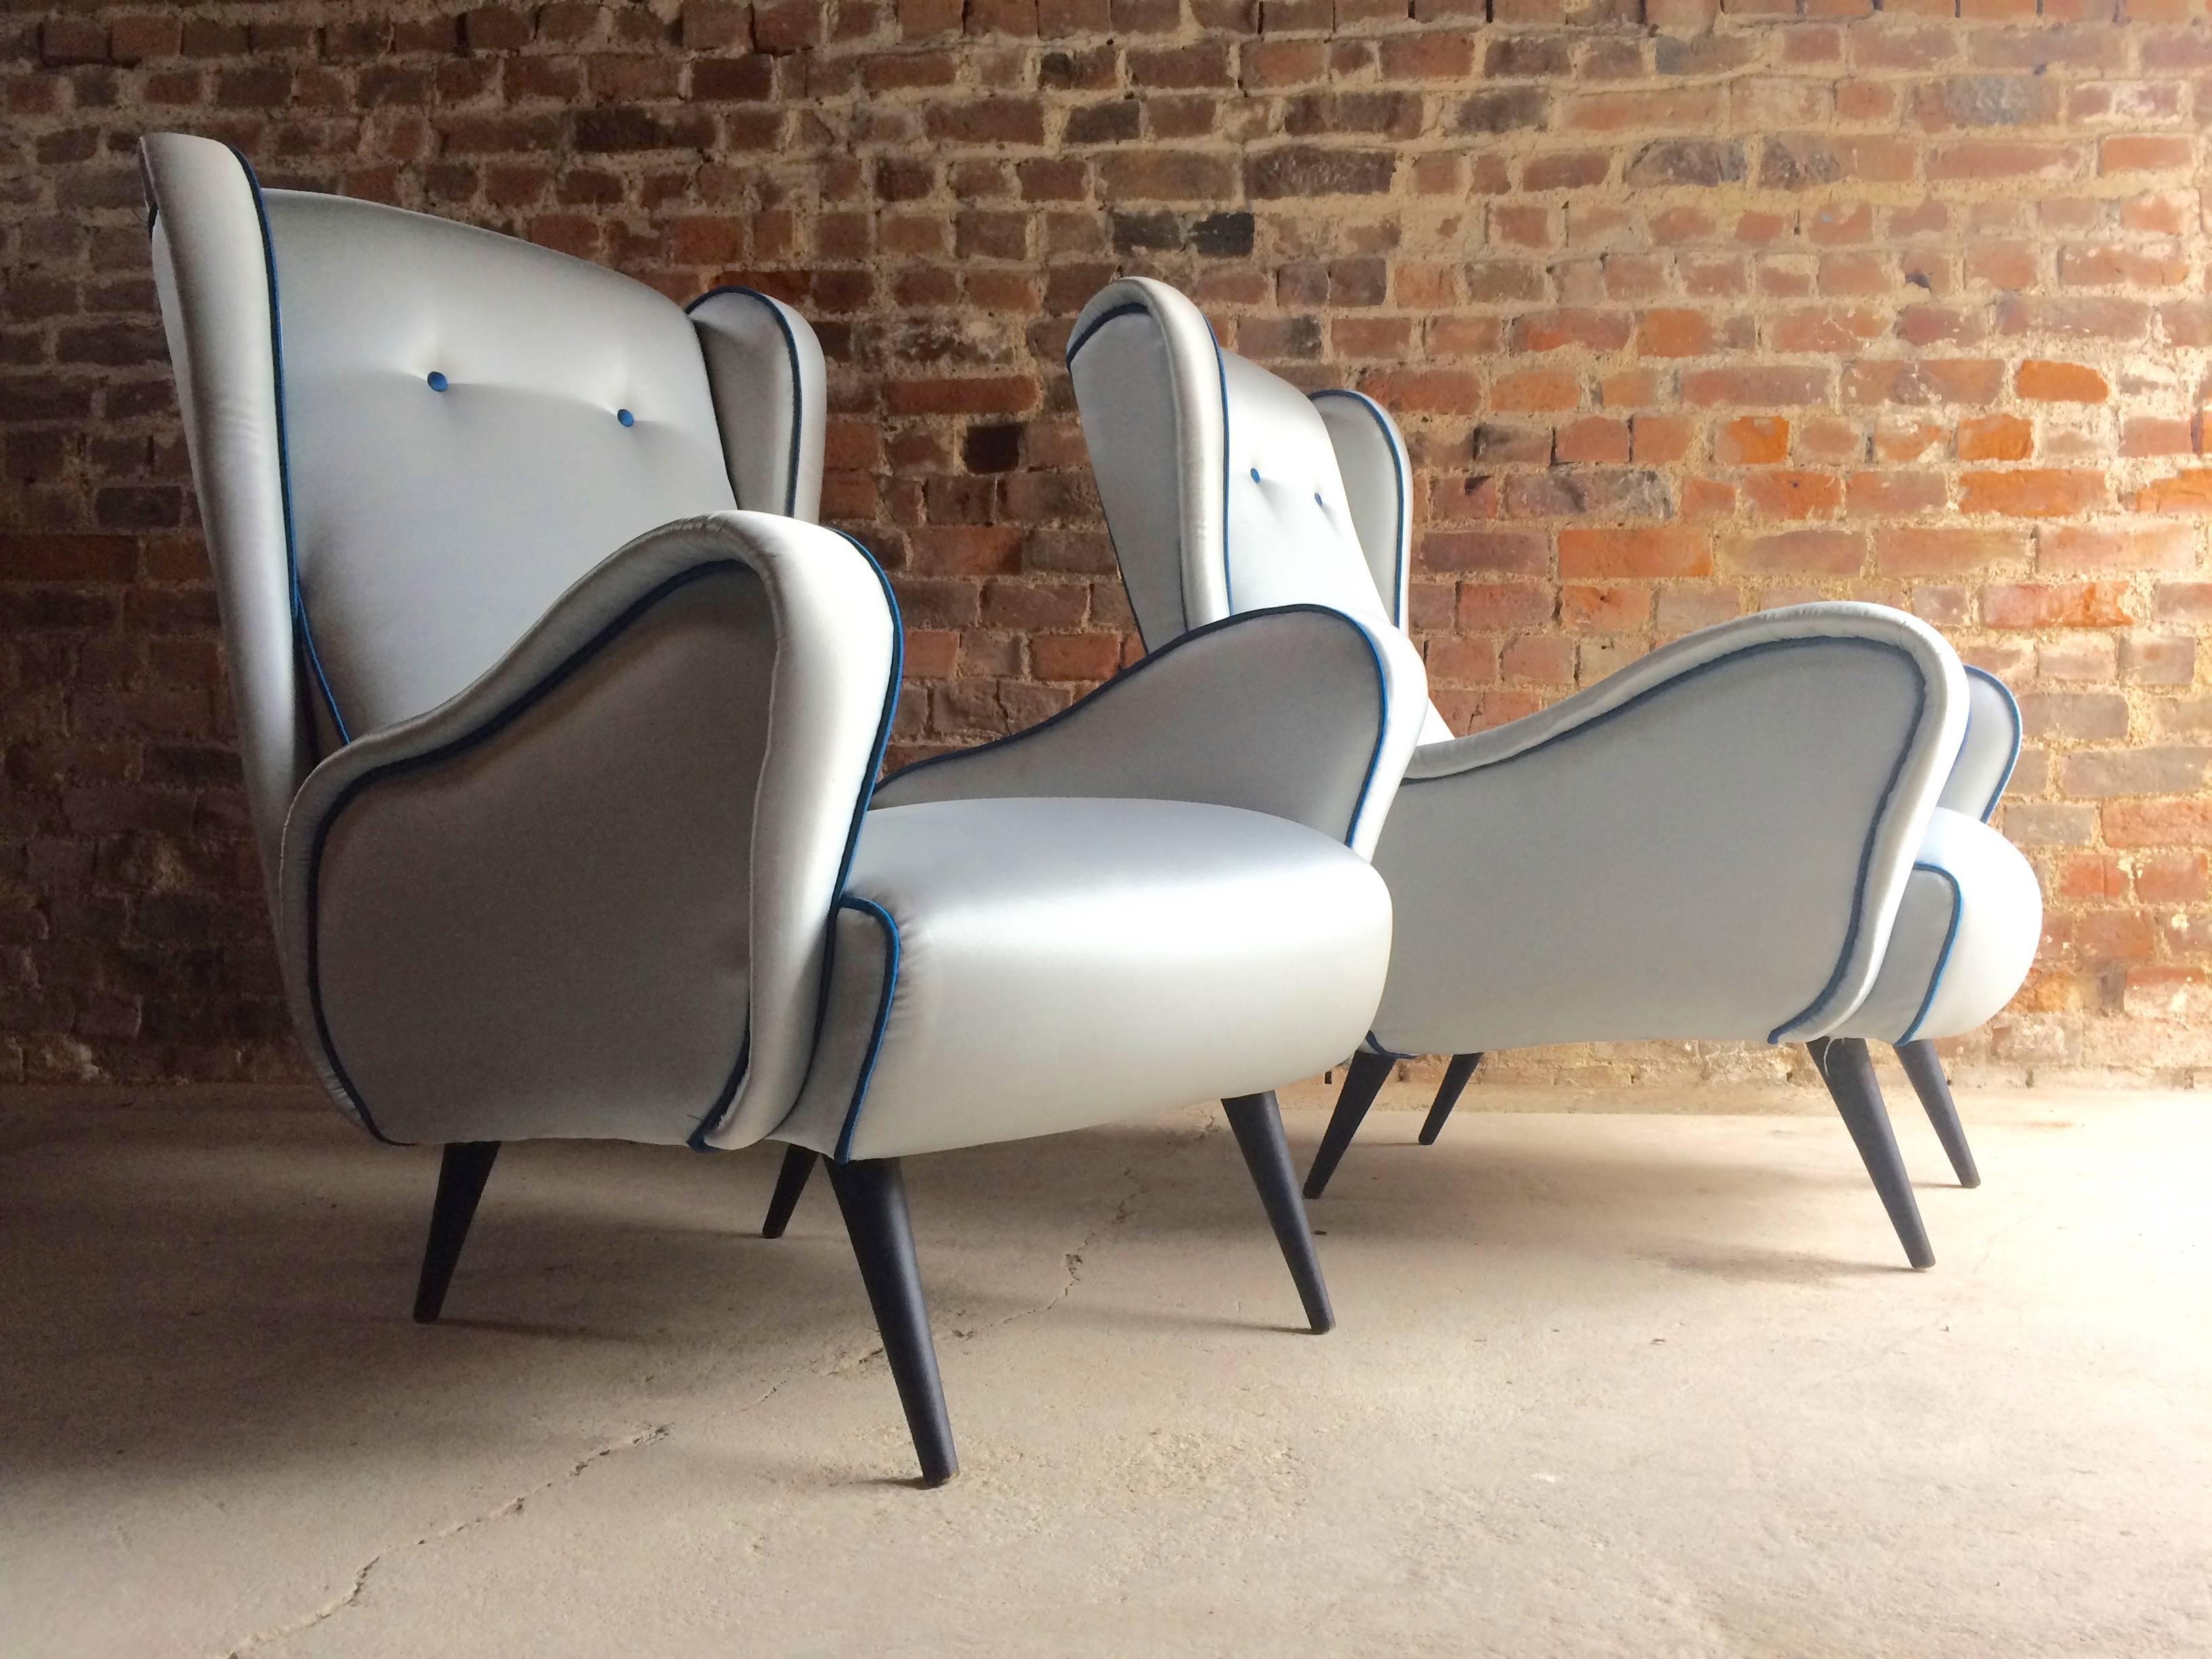 American Classical Italian Armchairs Lounge Chairs 1950s Vintage Midcentury Blue Upholstered